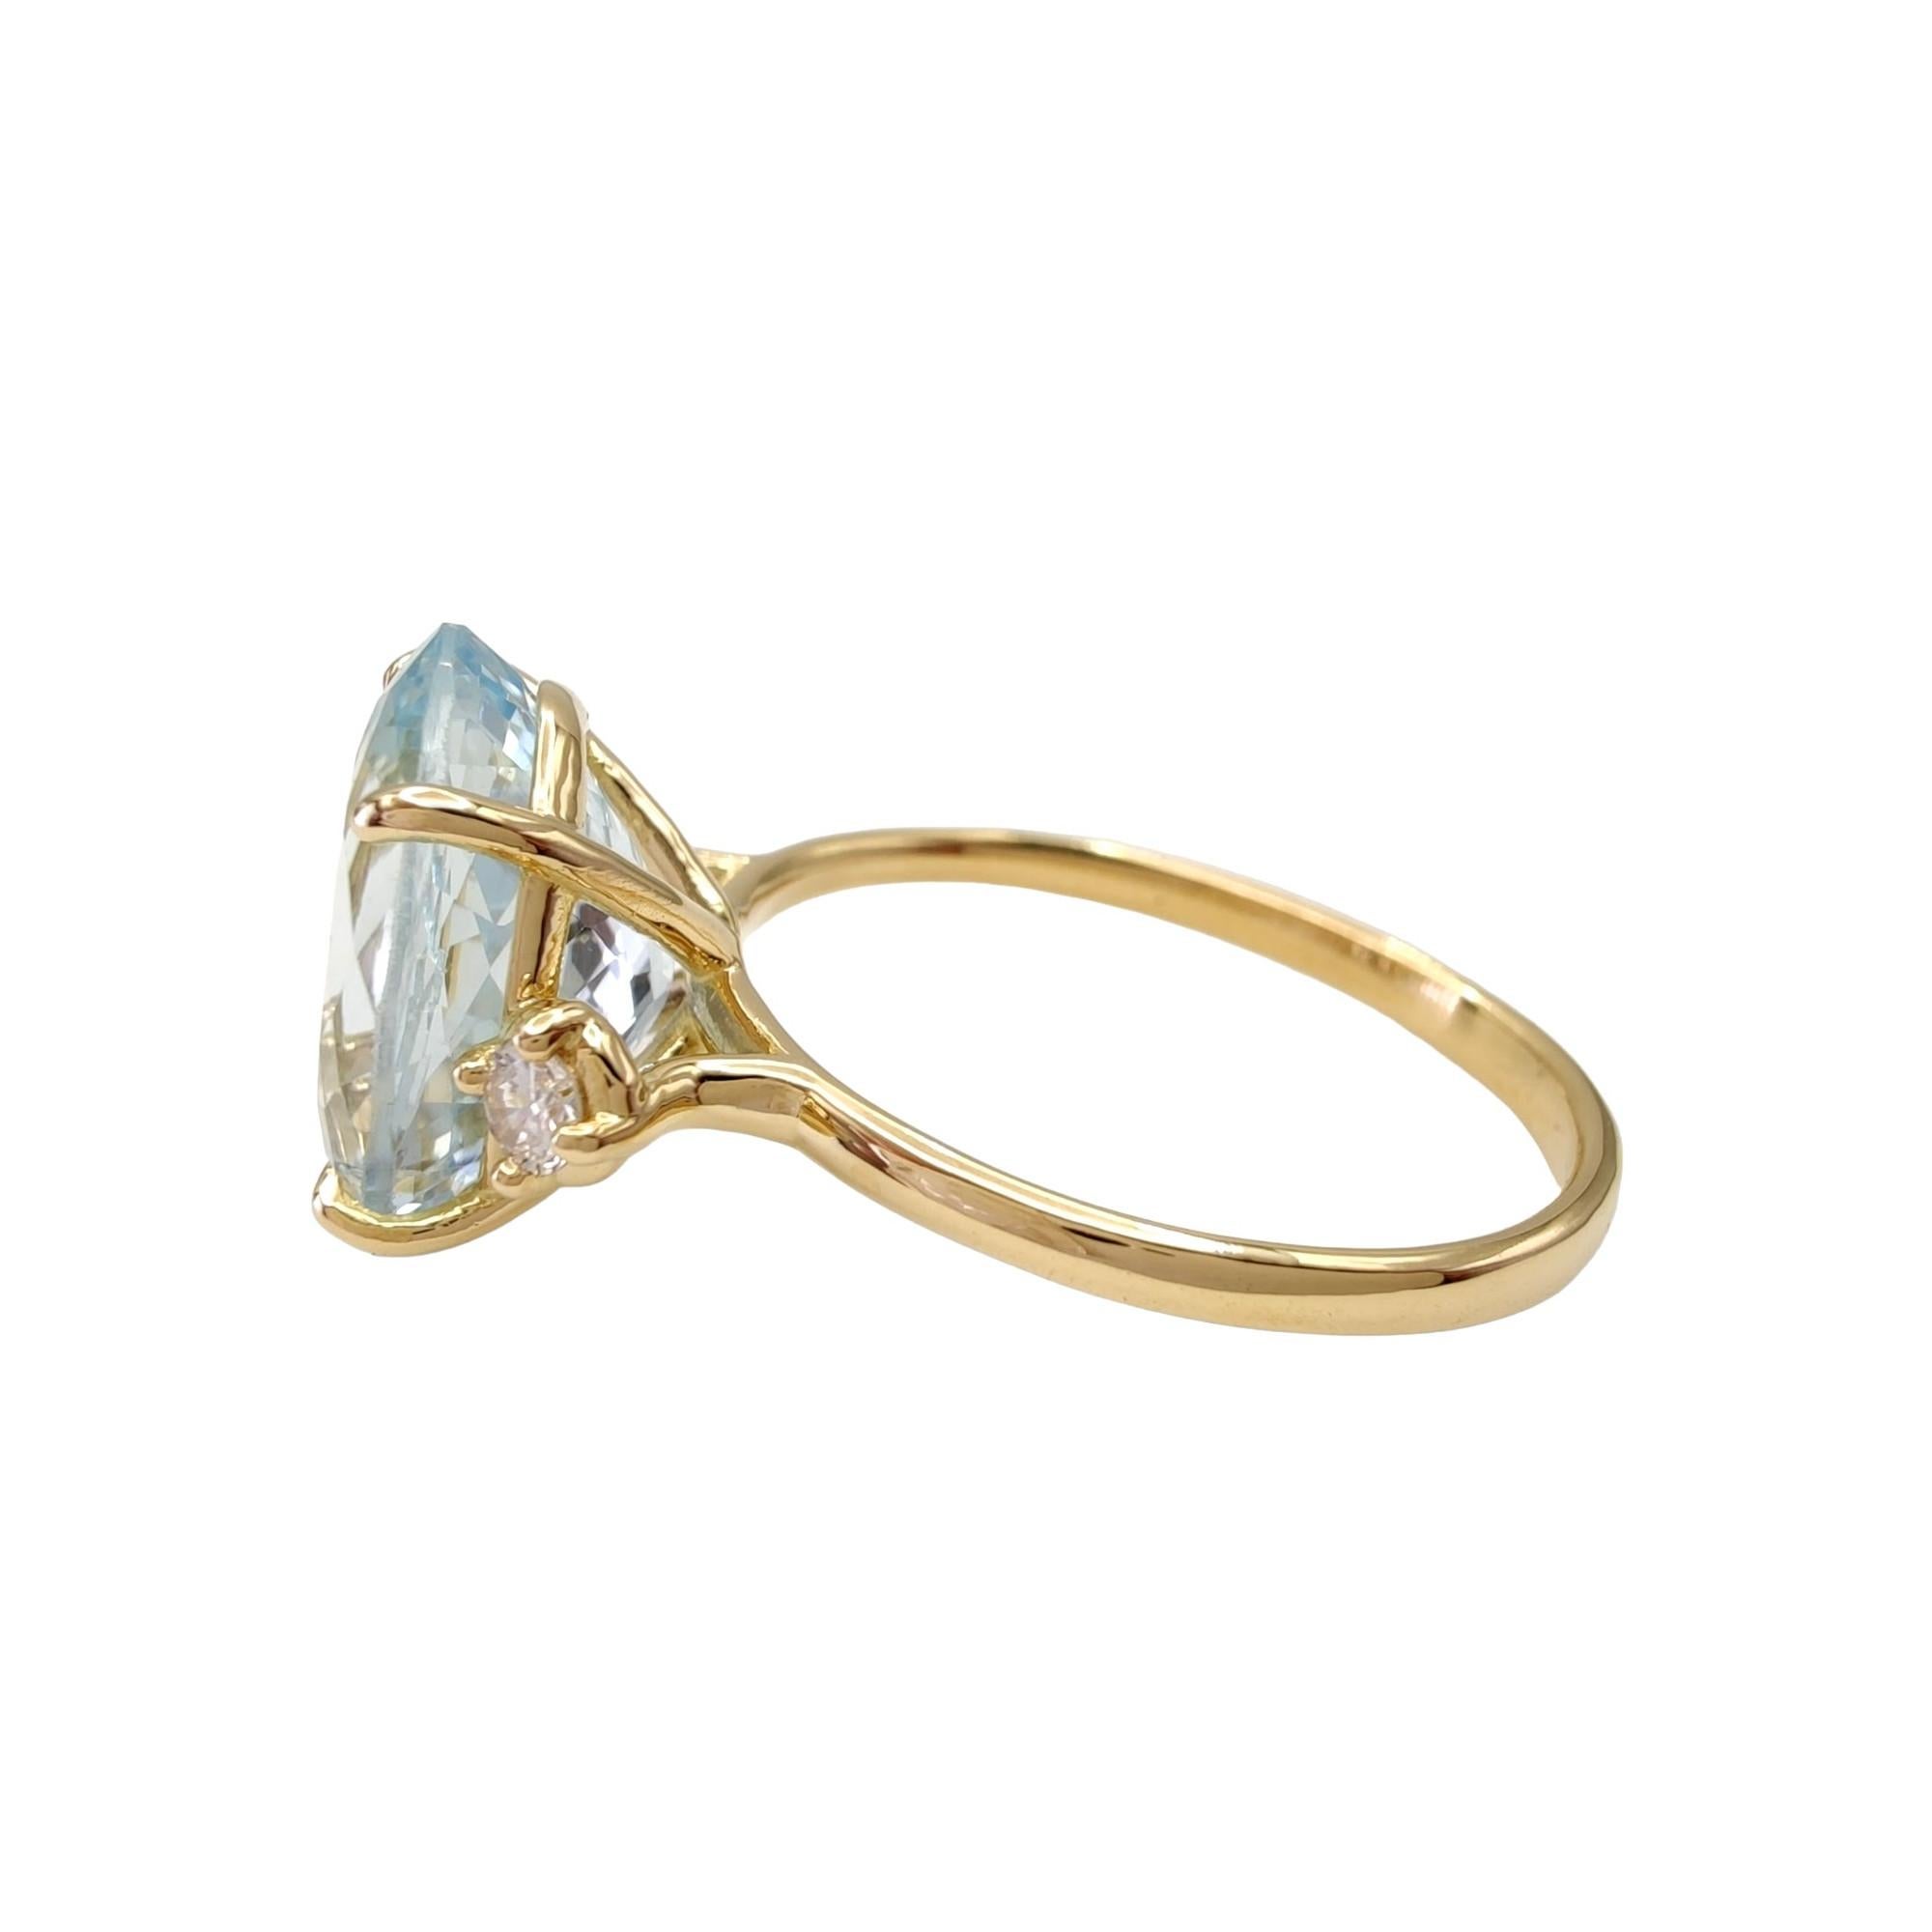 18K Gold Ring Aquamarine and Diamonds for weddings, engagements, proposals gifts 3